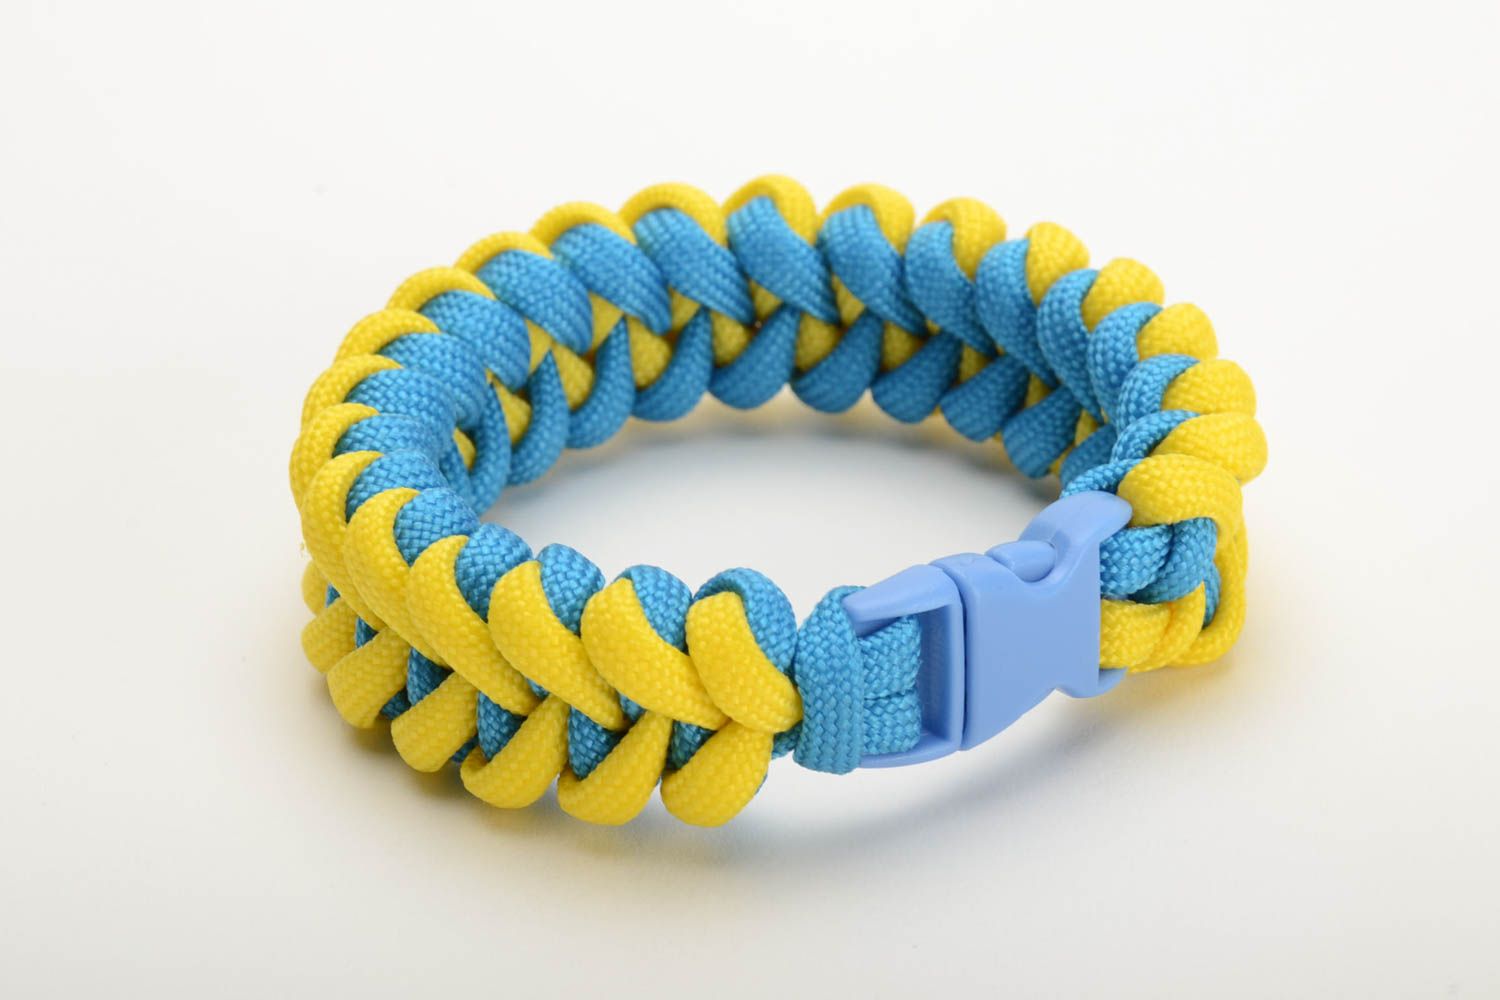 Handmade wrist survival bracelet woven of yellow and blue parachute cords photo 3